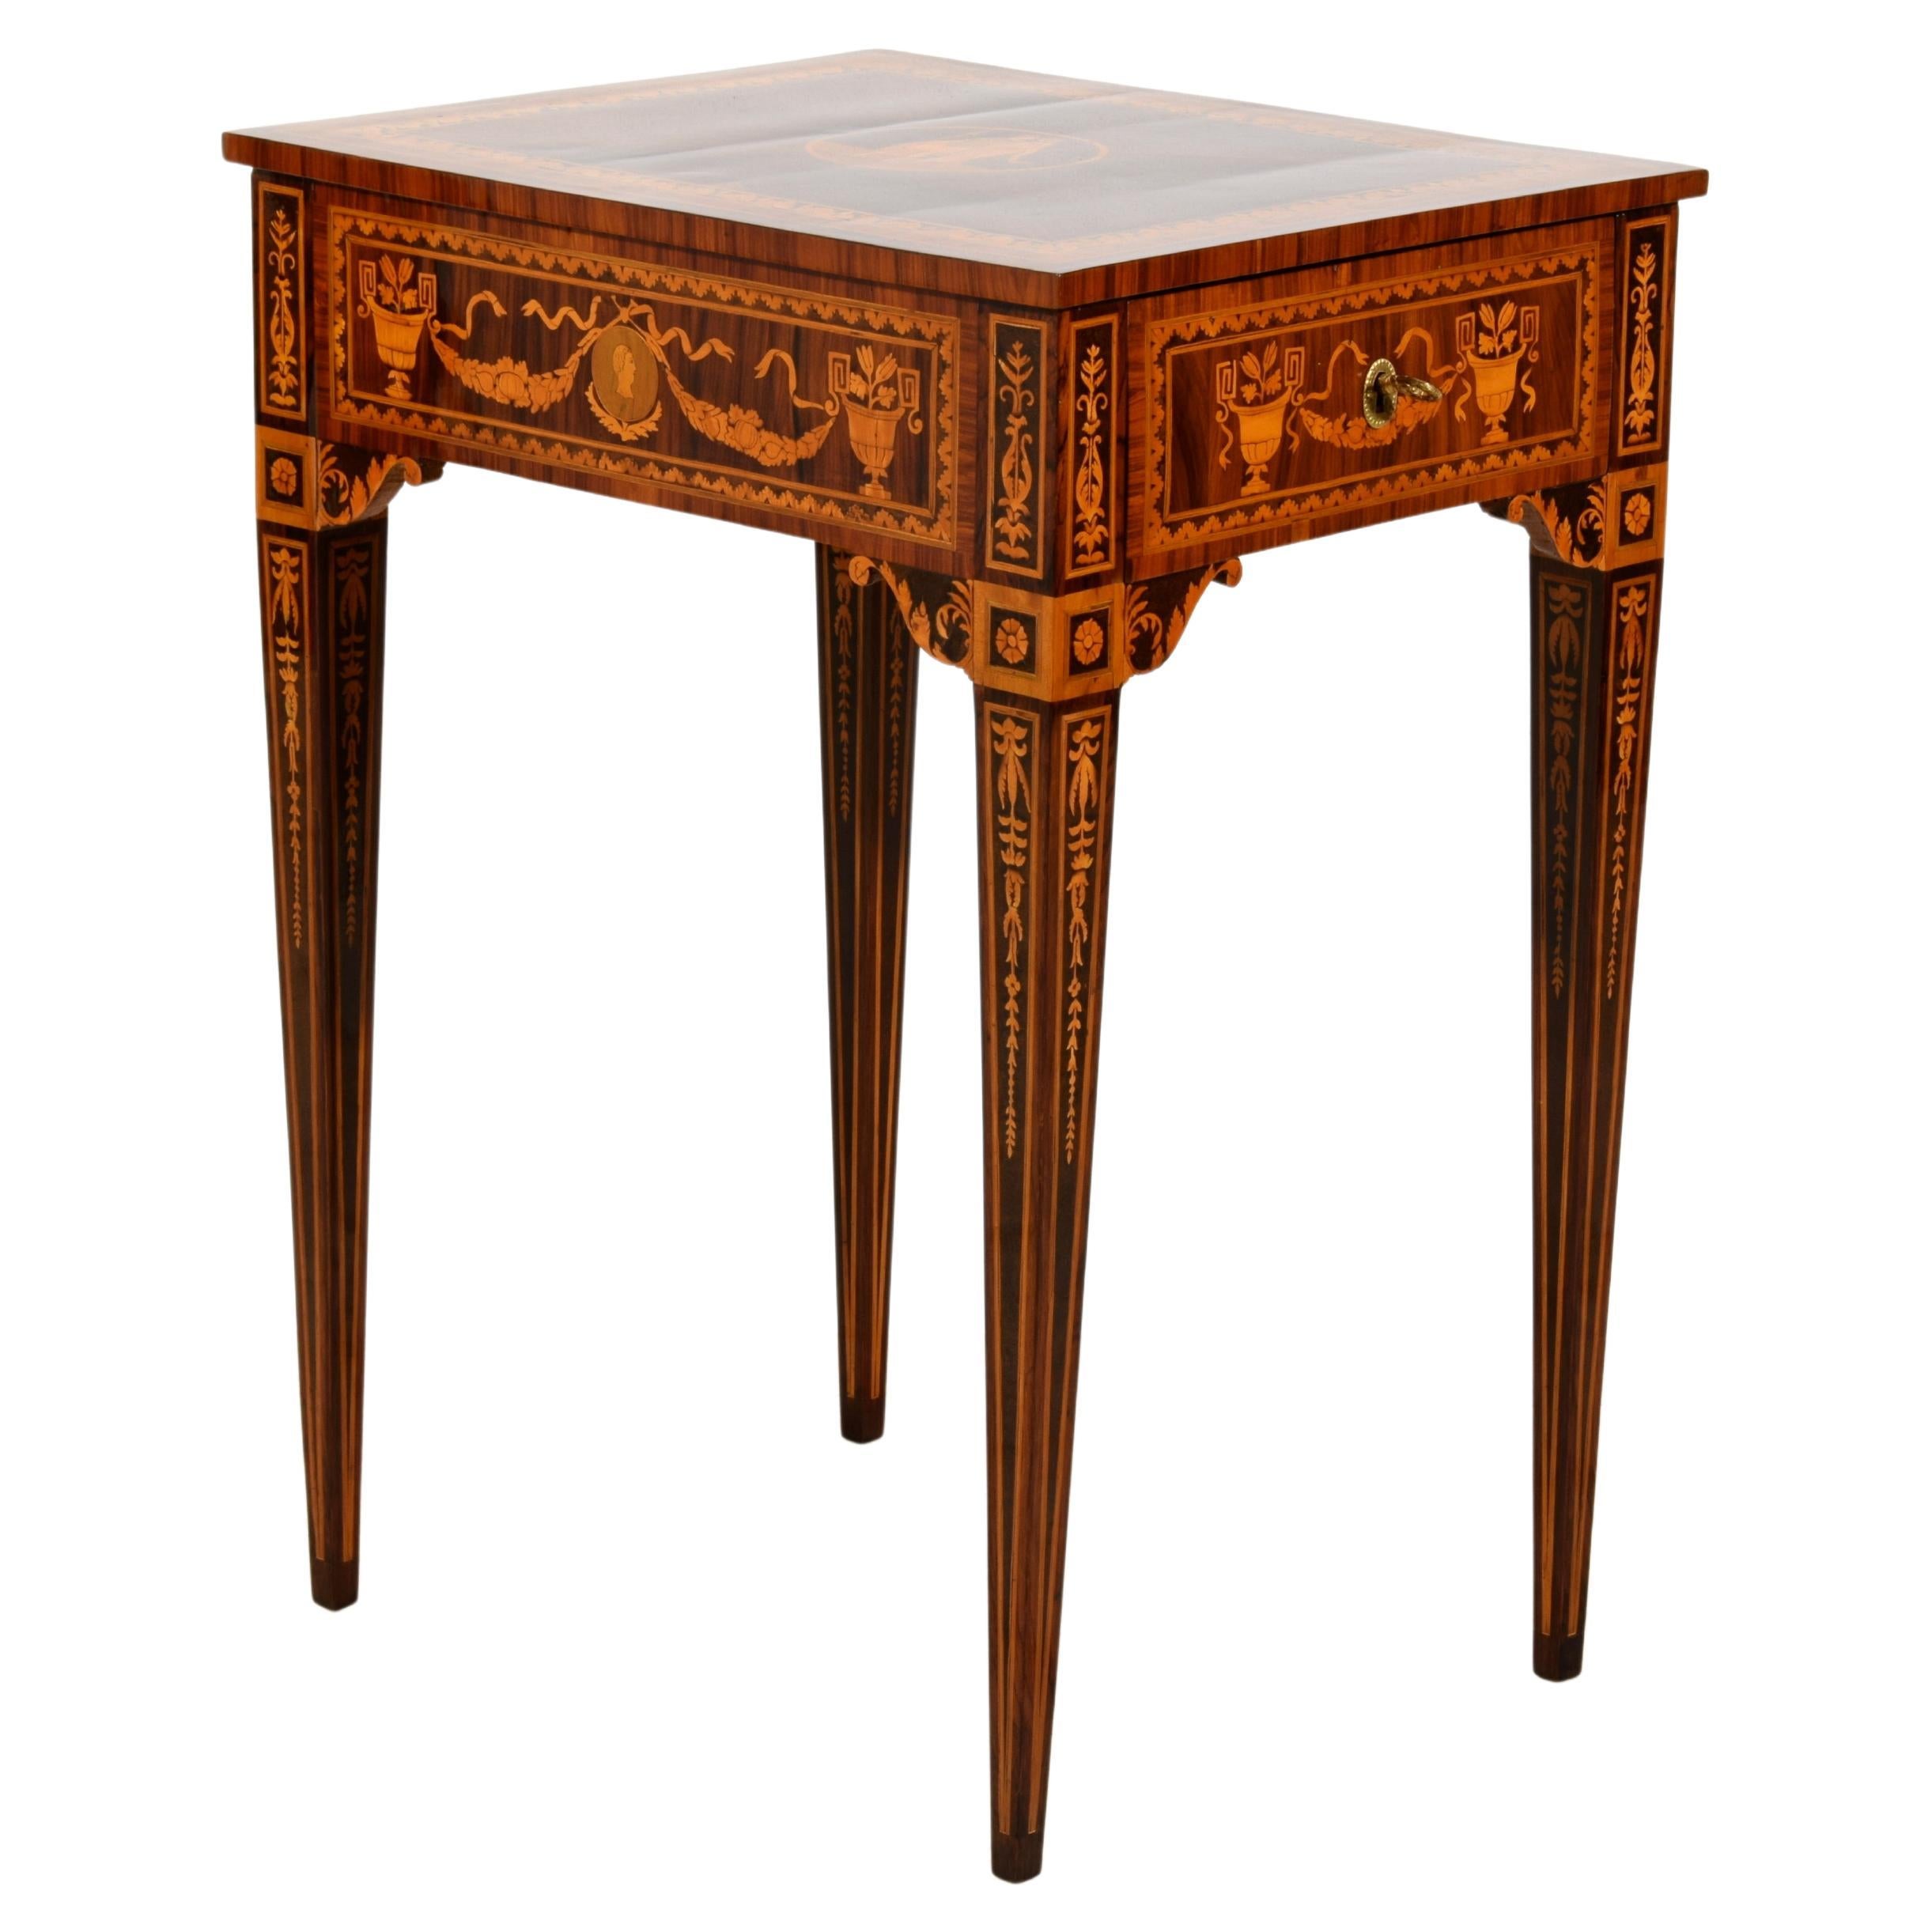 18th Century, Italian Neoclassical Inlay Wood Centre Table 